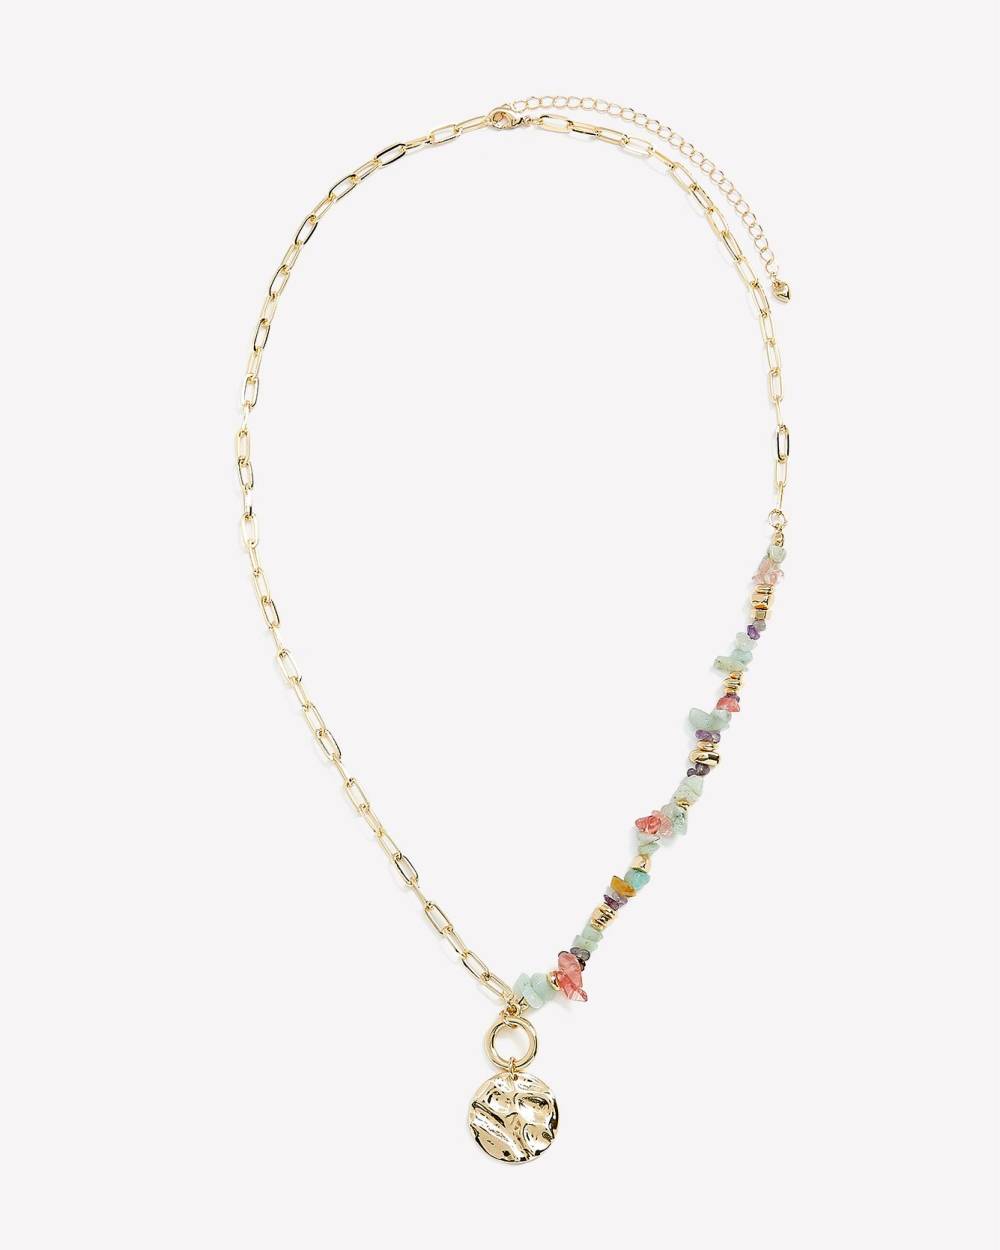 Golden Chain with Stones and Medallion | Penningtons